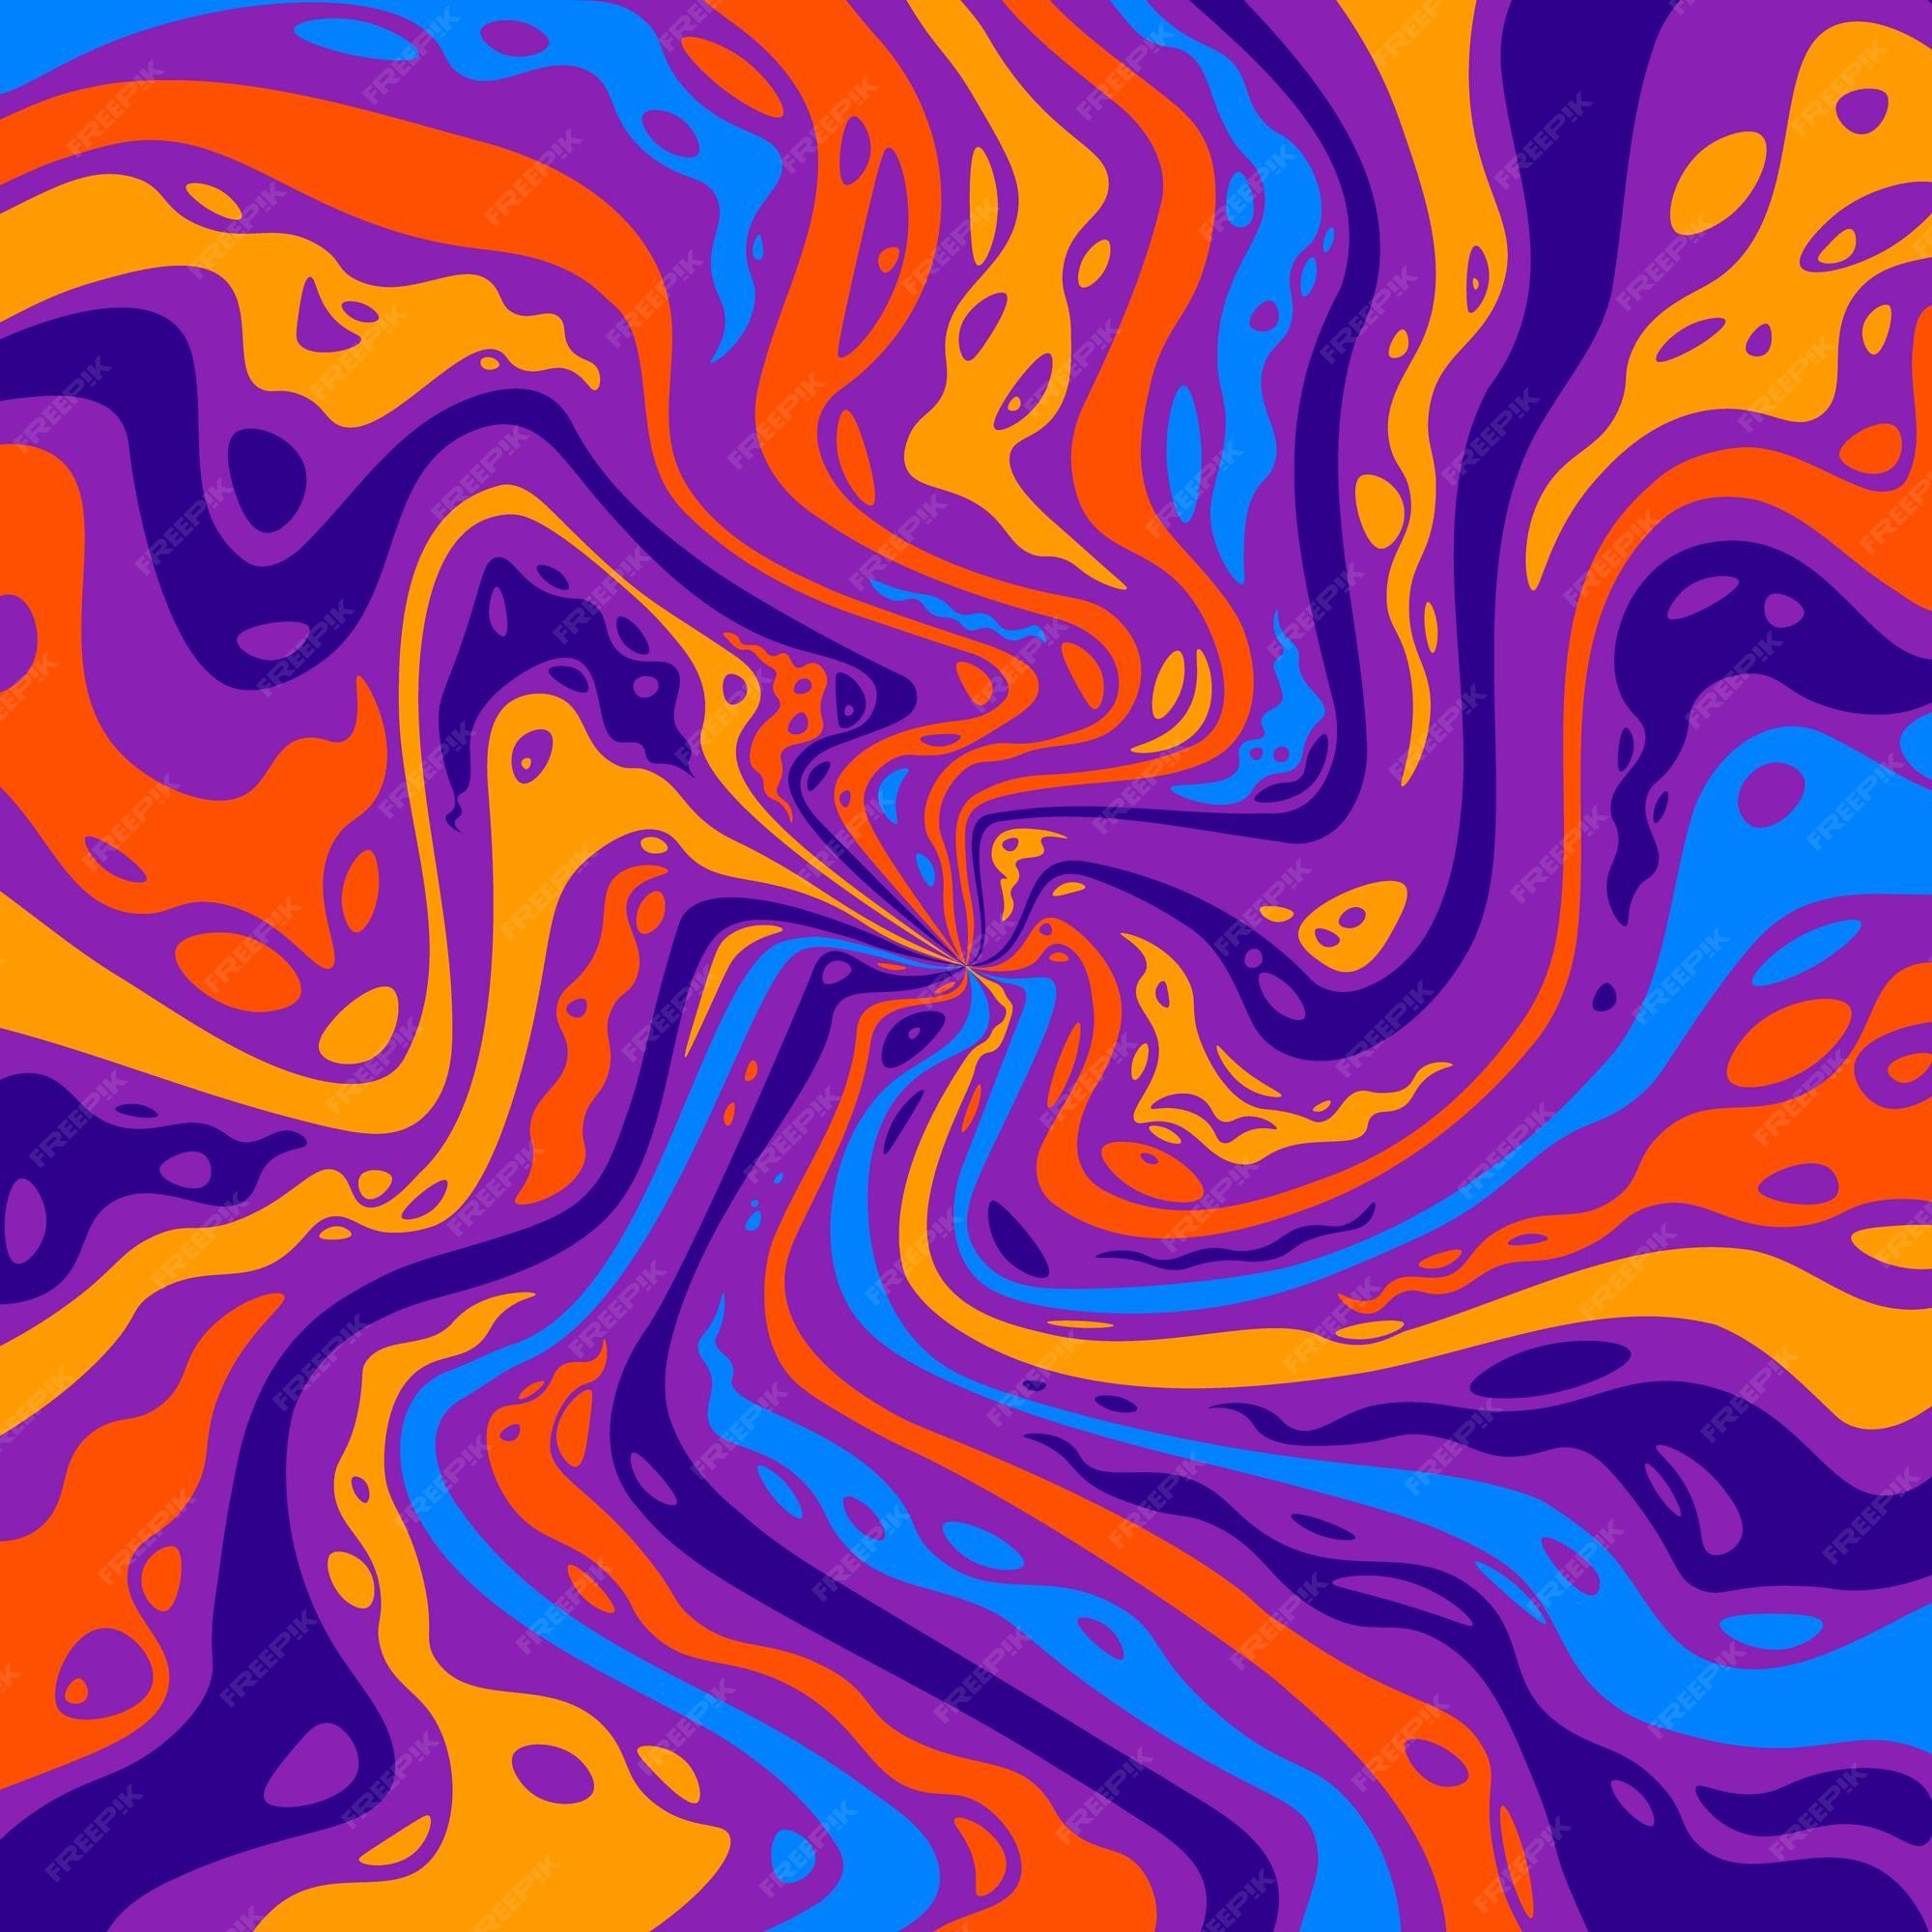 Premium Vector. Abstract psychedelic groovy background vector illustration